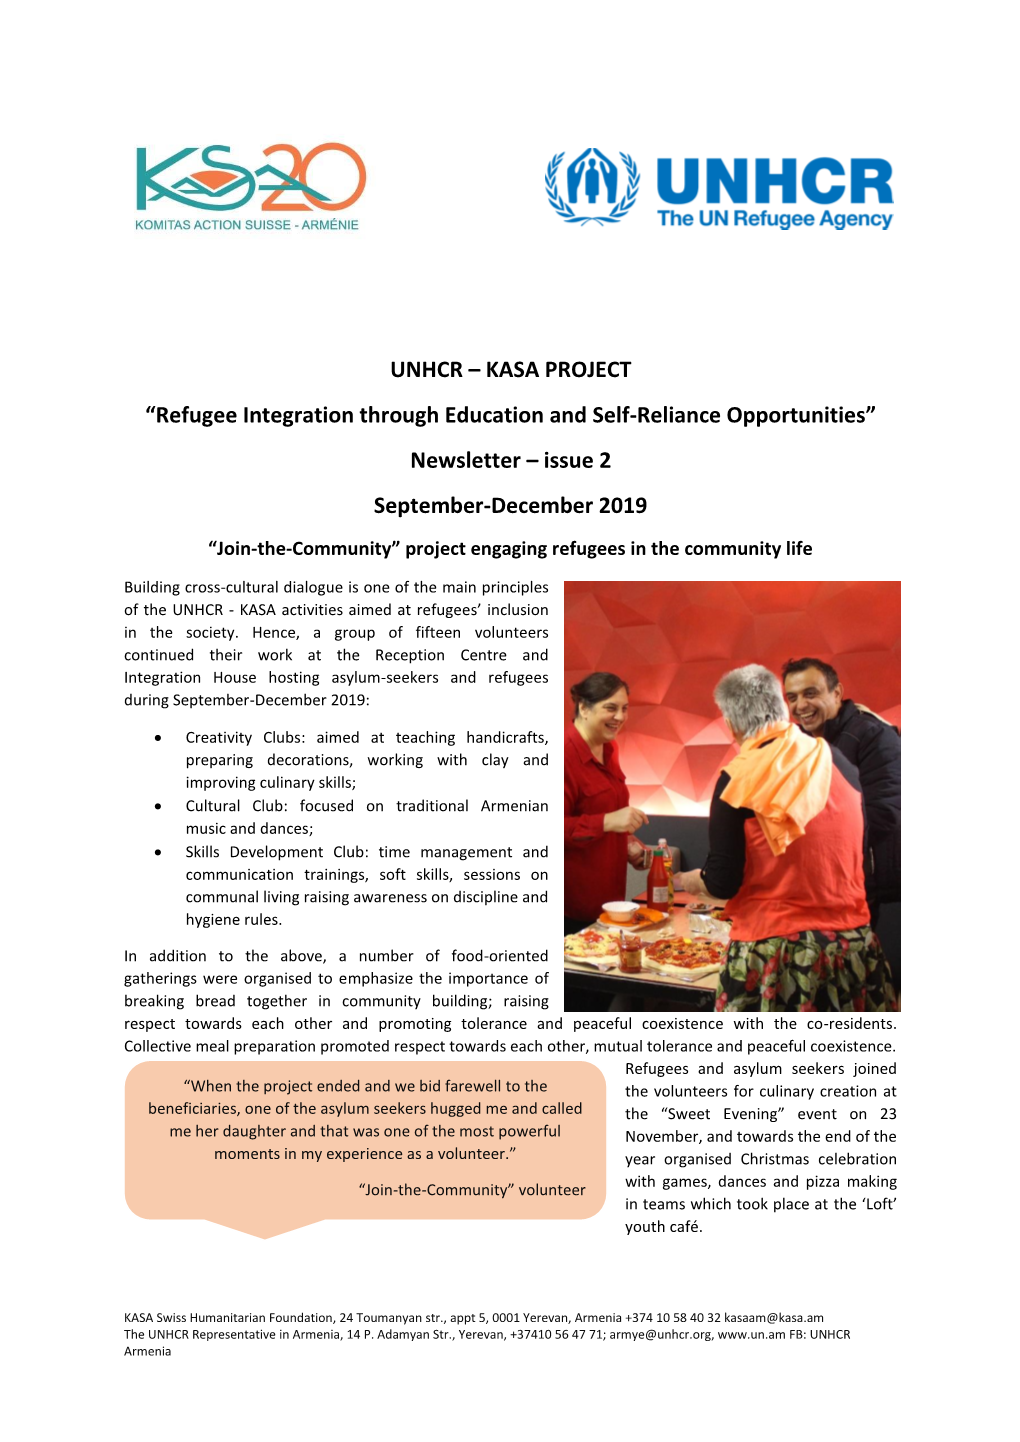 UNHCR – KASA PROJECT “Refugee Integration Through Education and Self-Reliance Opportunities” Newsletter – Issue 2 September-December 2019